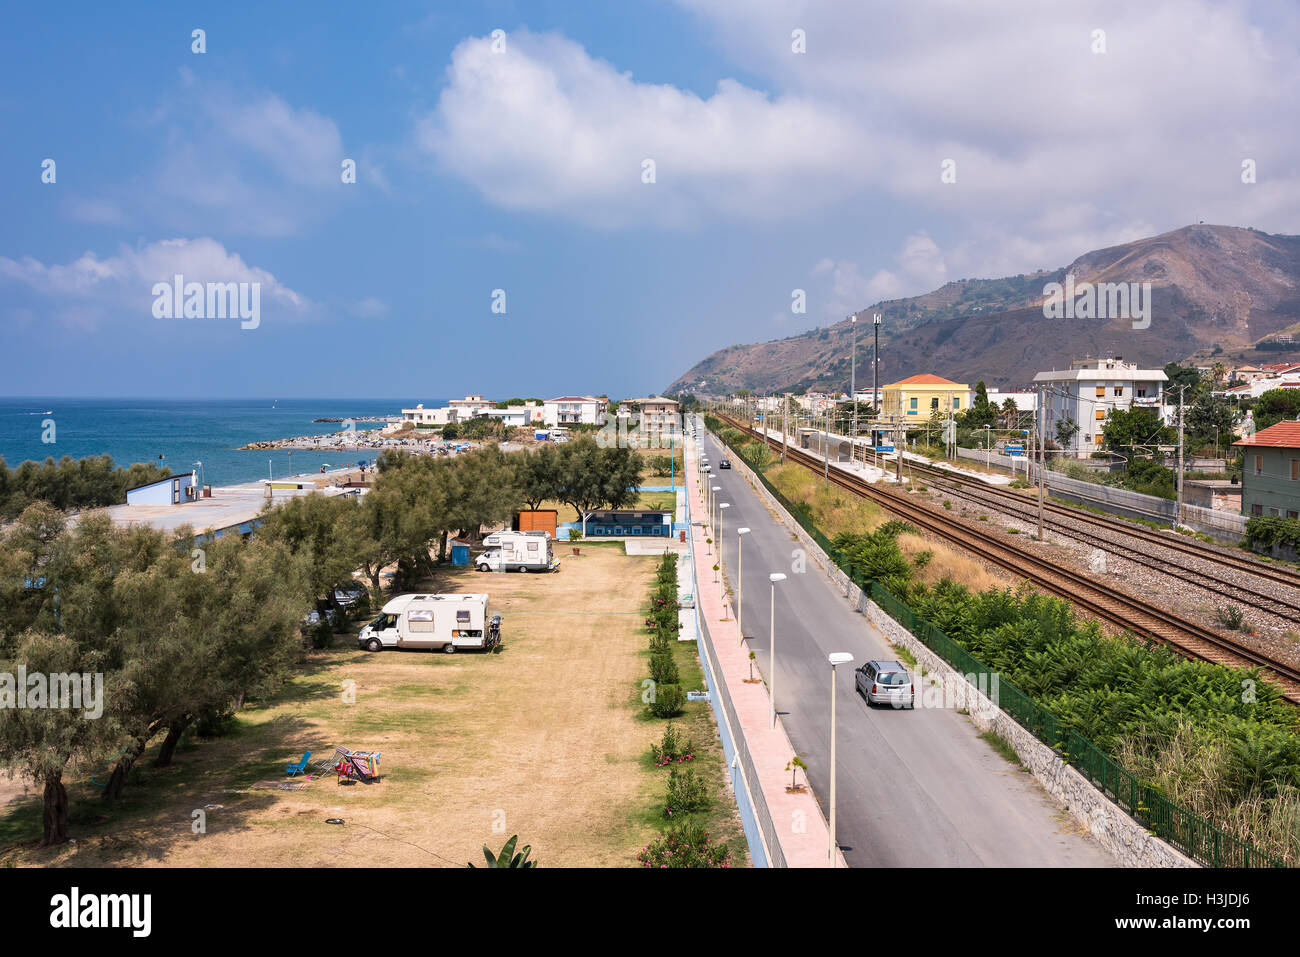 View of Campora San Giovanni town in Calabria, Italy Stock Photo